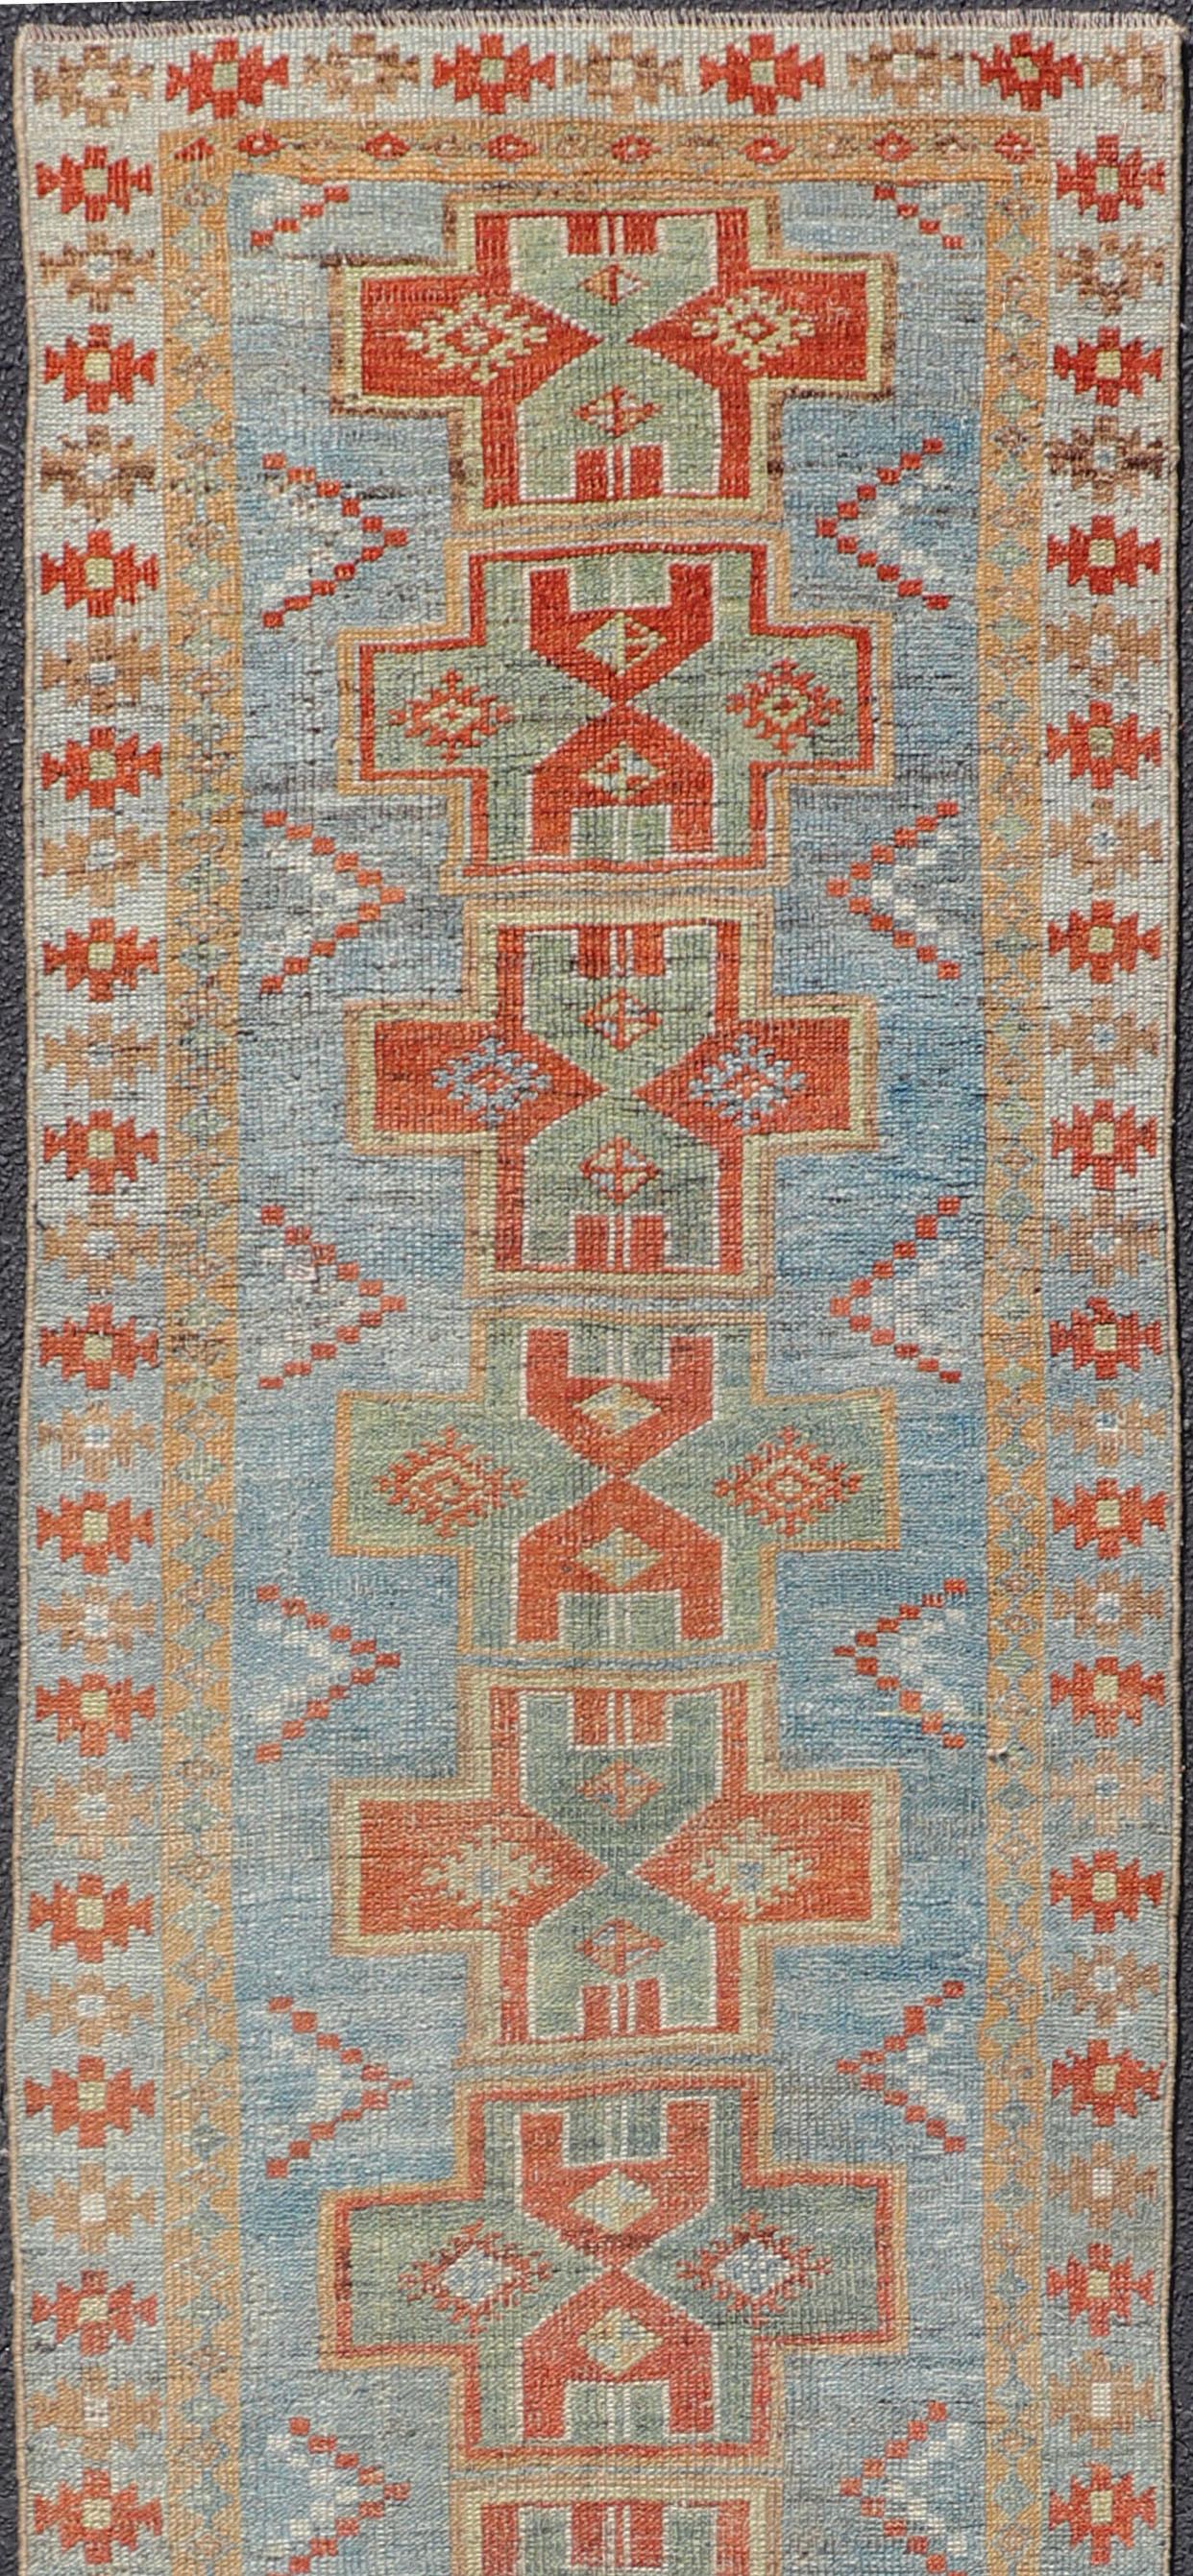 Green, light Blue and red Persian antique Heriz Runner with sub-geometric Paisley design, Keivan Woven Arts/rug SUS-2012-925, country of origin or type: Iran / Malayer, circa 1920. 

This magnificent antique Persian Malayer rug (circa 1920) bears